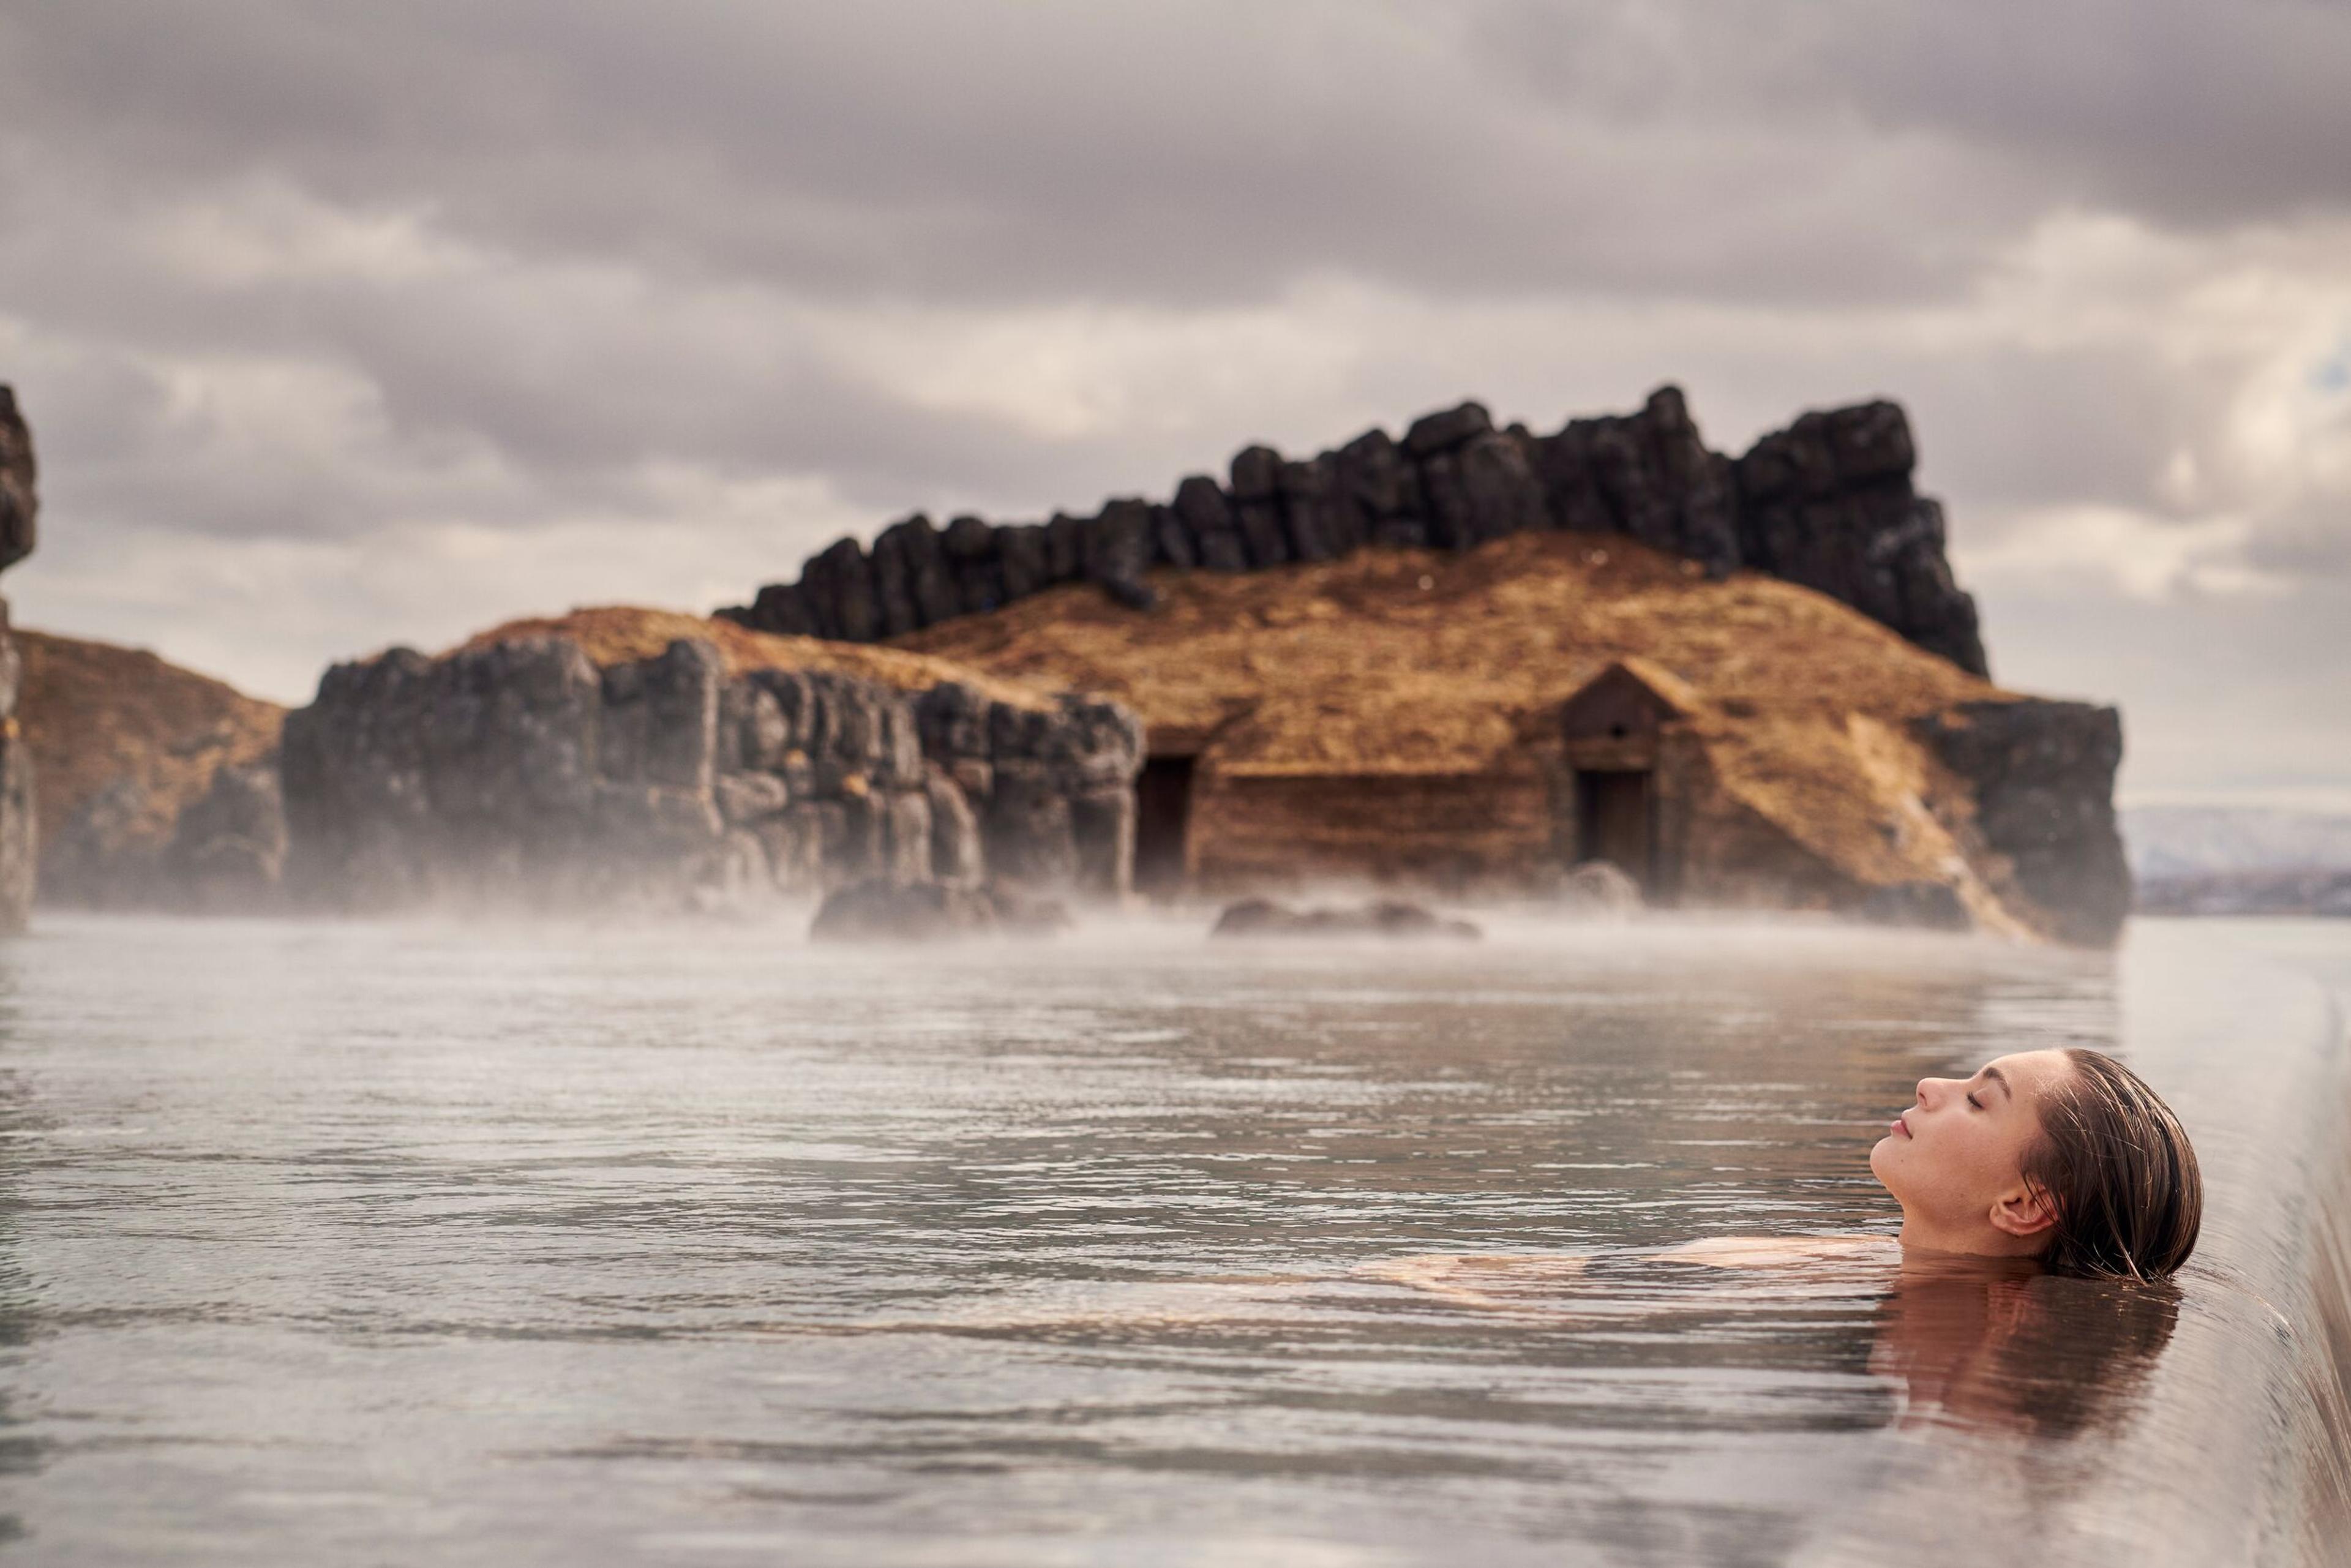 A woman immersed in the geothermal waters of Sky Lagoon Iceland, surrounded by rocky cliffs and enveloped in the ethereal mist of the warm water, under a soft, hazy sky.